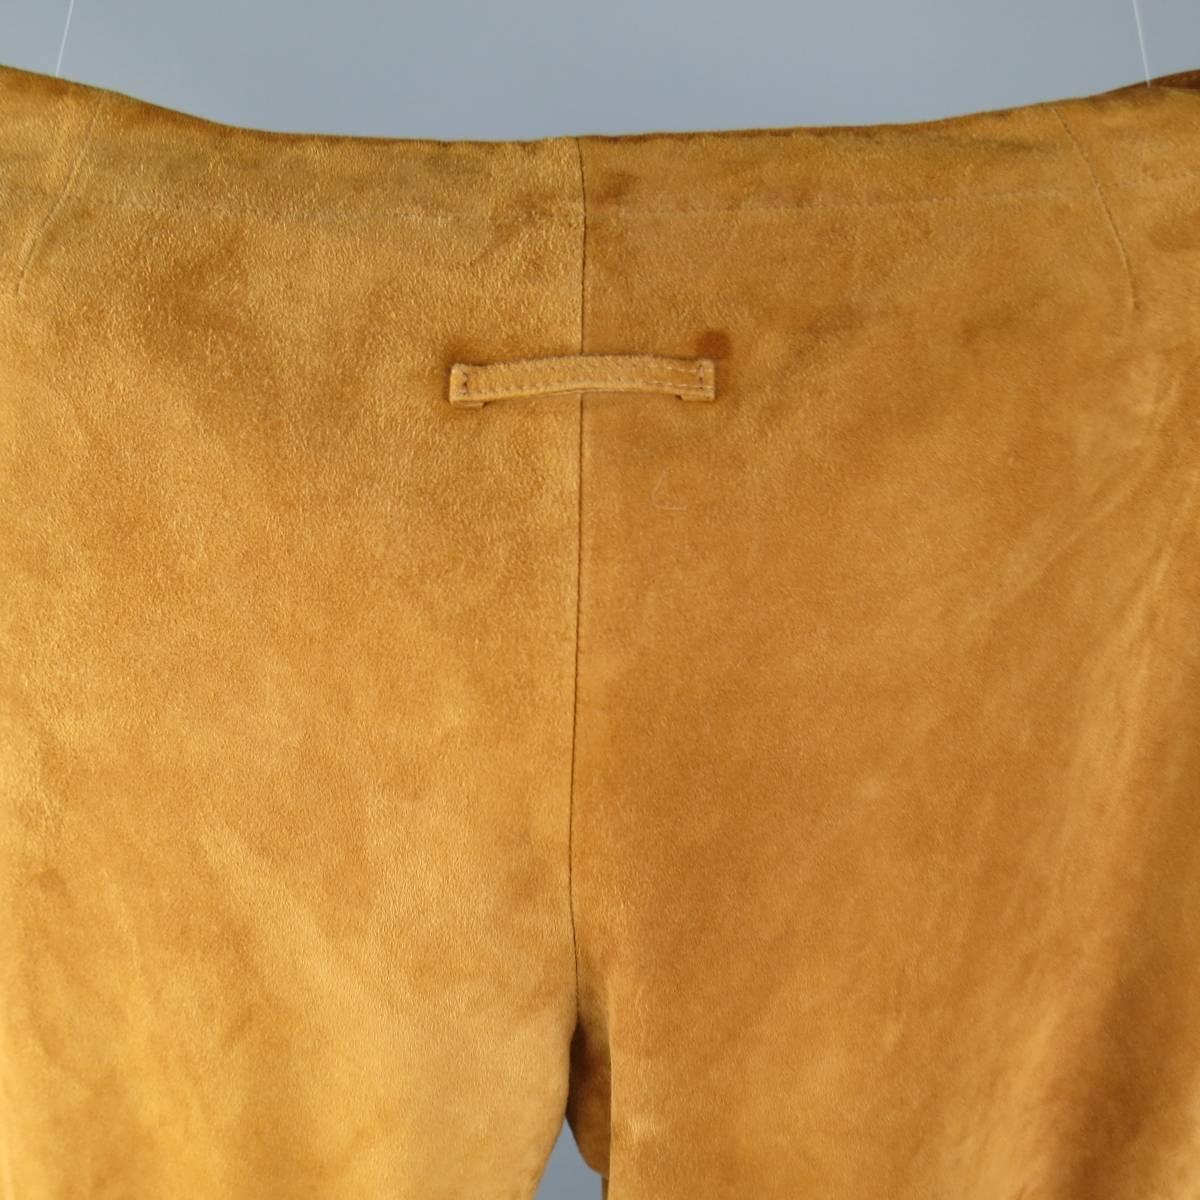 Vintage JEAN PAUL GAULTIER pants in a rich tan soft suede with a clean, semi flair silhouette and signature back tab. Imperfection on back. Never worn.  Made in Italy.
 
New with Defect and Tags.
Marked: US 34
 
Measurements:
 
Waist: 38 in.
Rise: